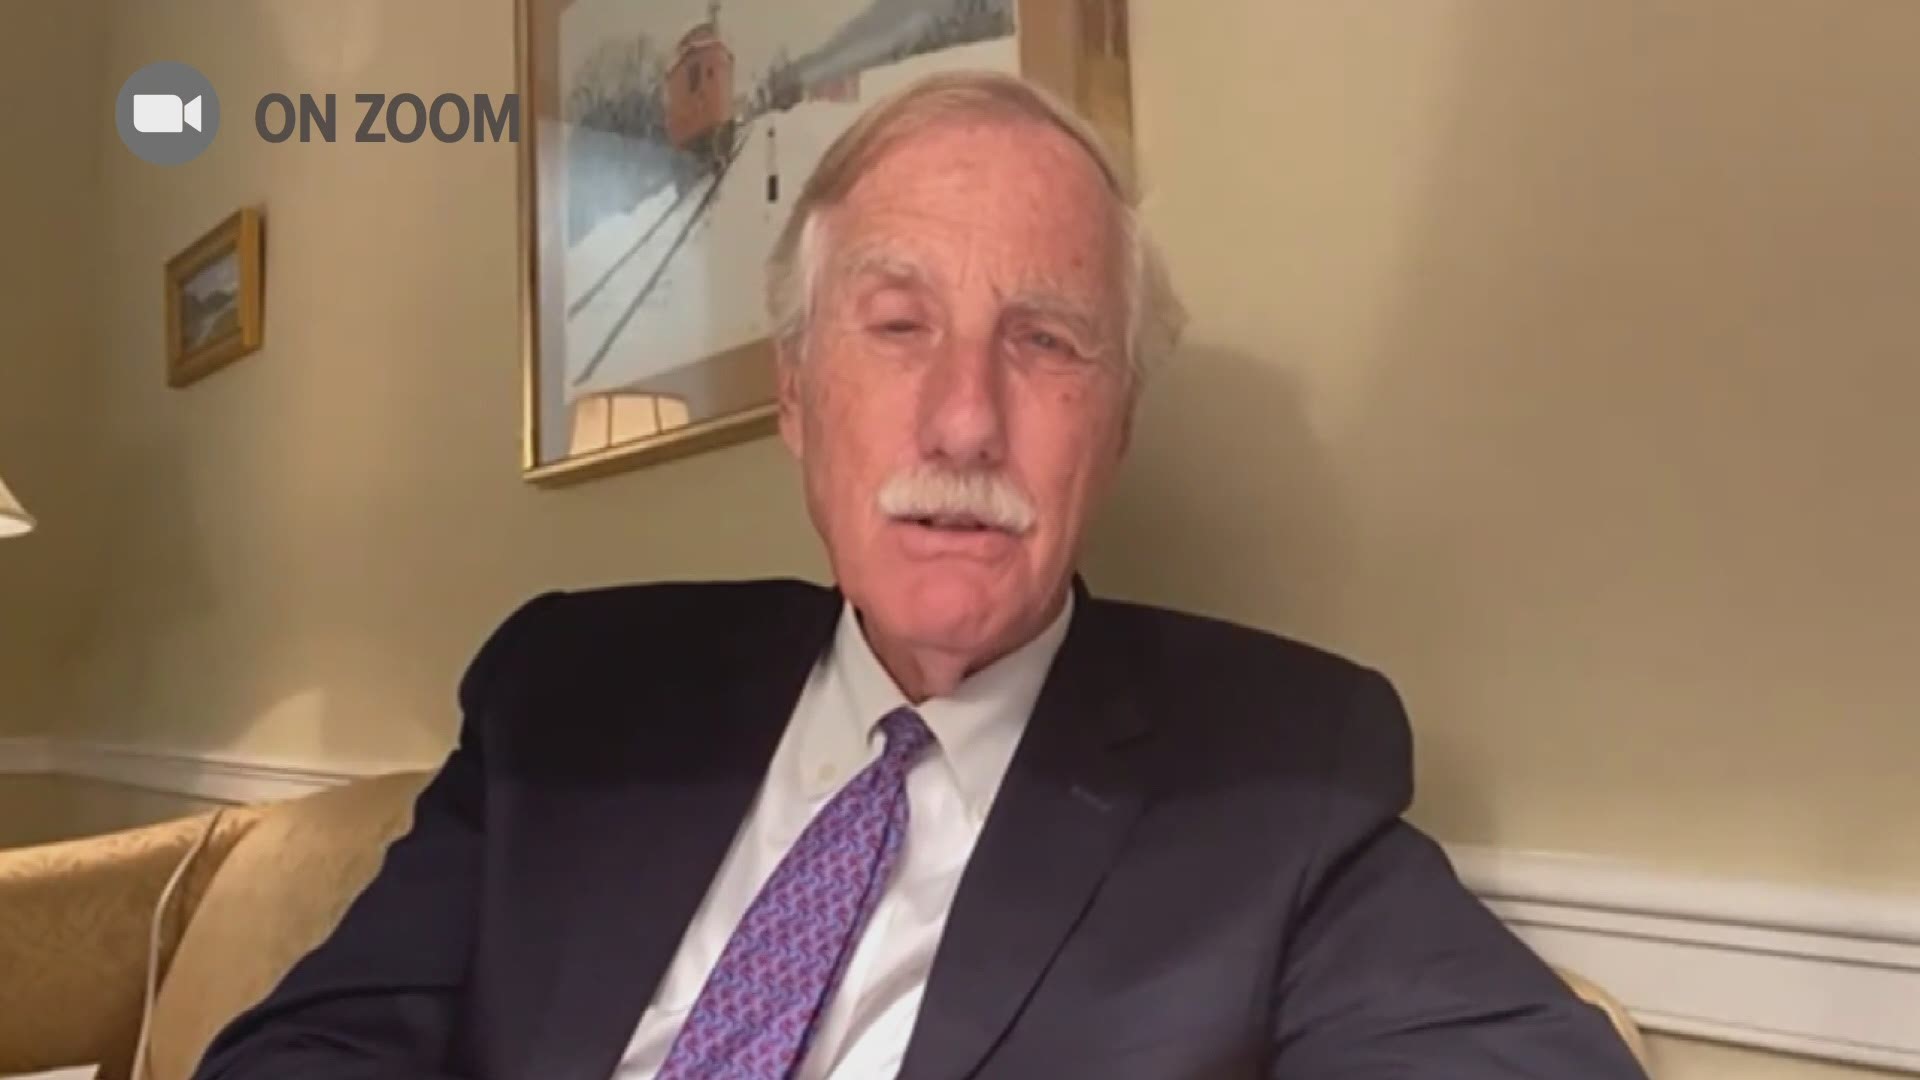 On the anniversary of the Clean Air Act, Sen. Angus King says there's more work to be done to combat climate change